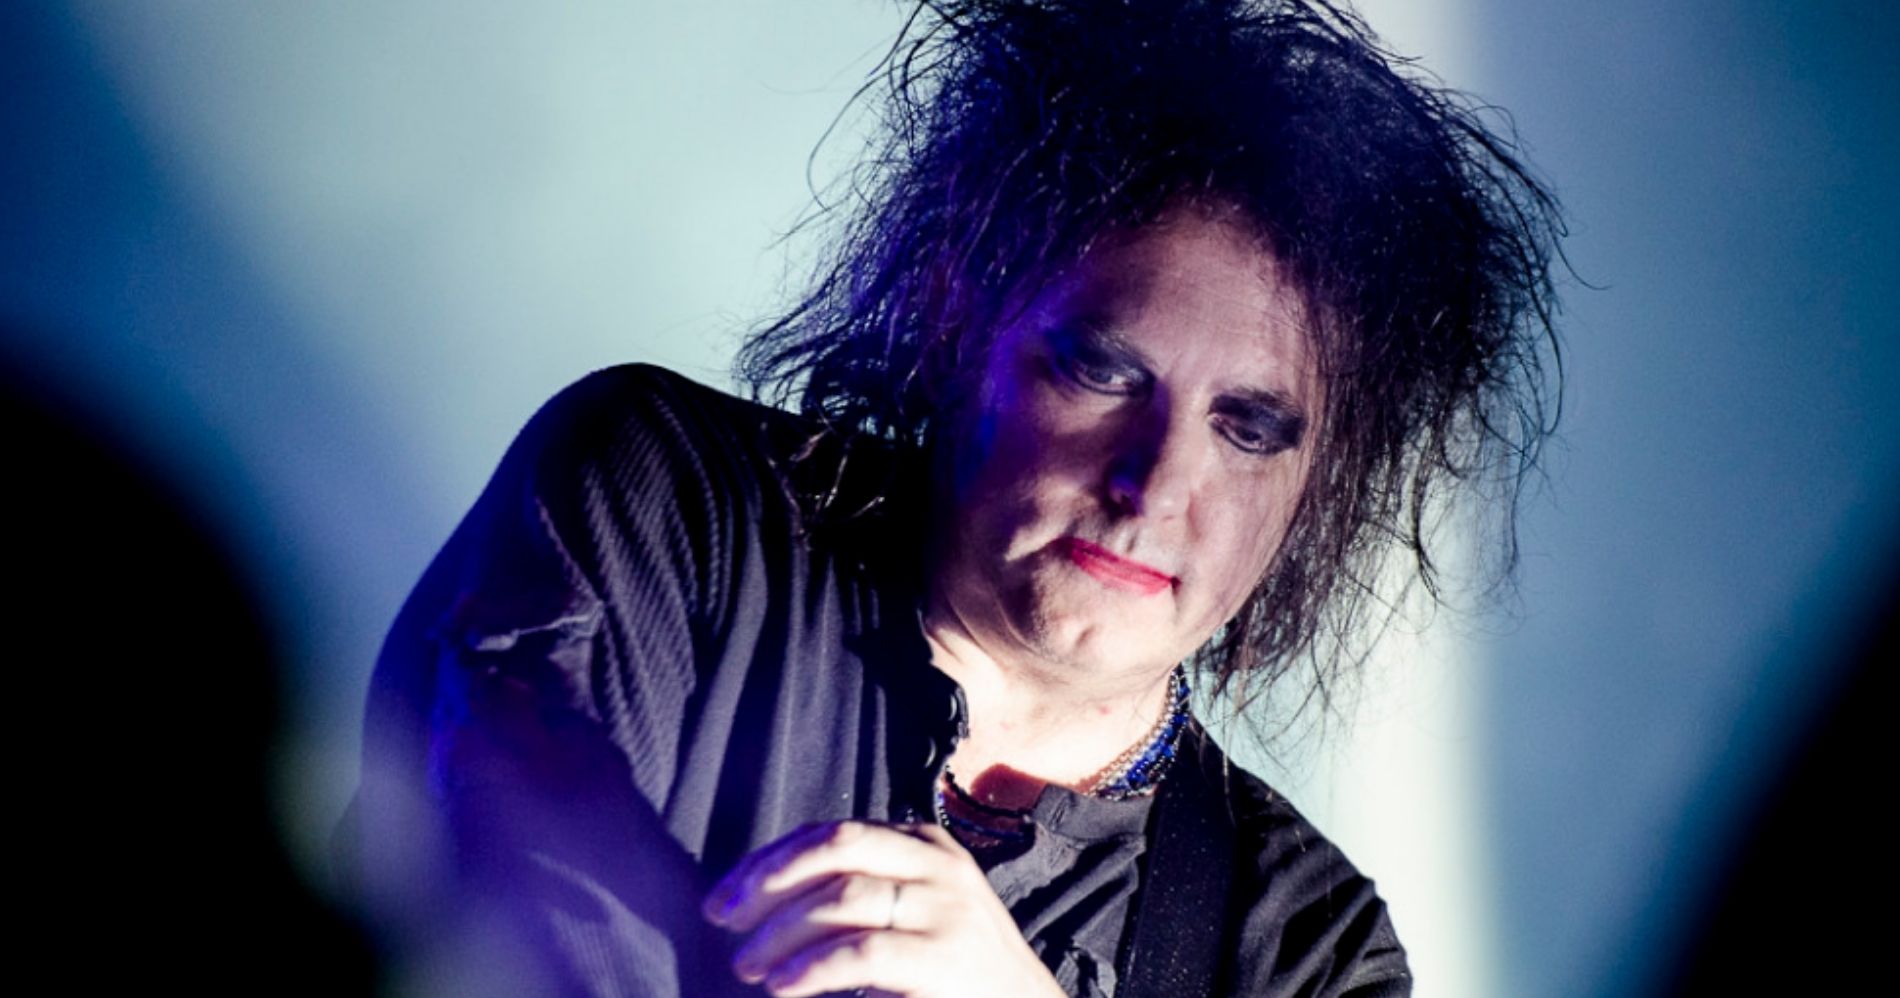 Robert Smith The Cure courtesy by Flickr